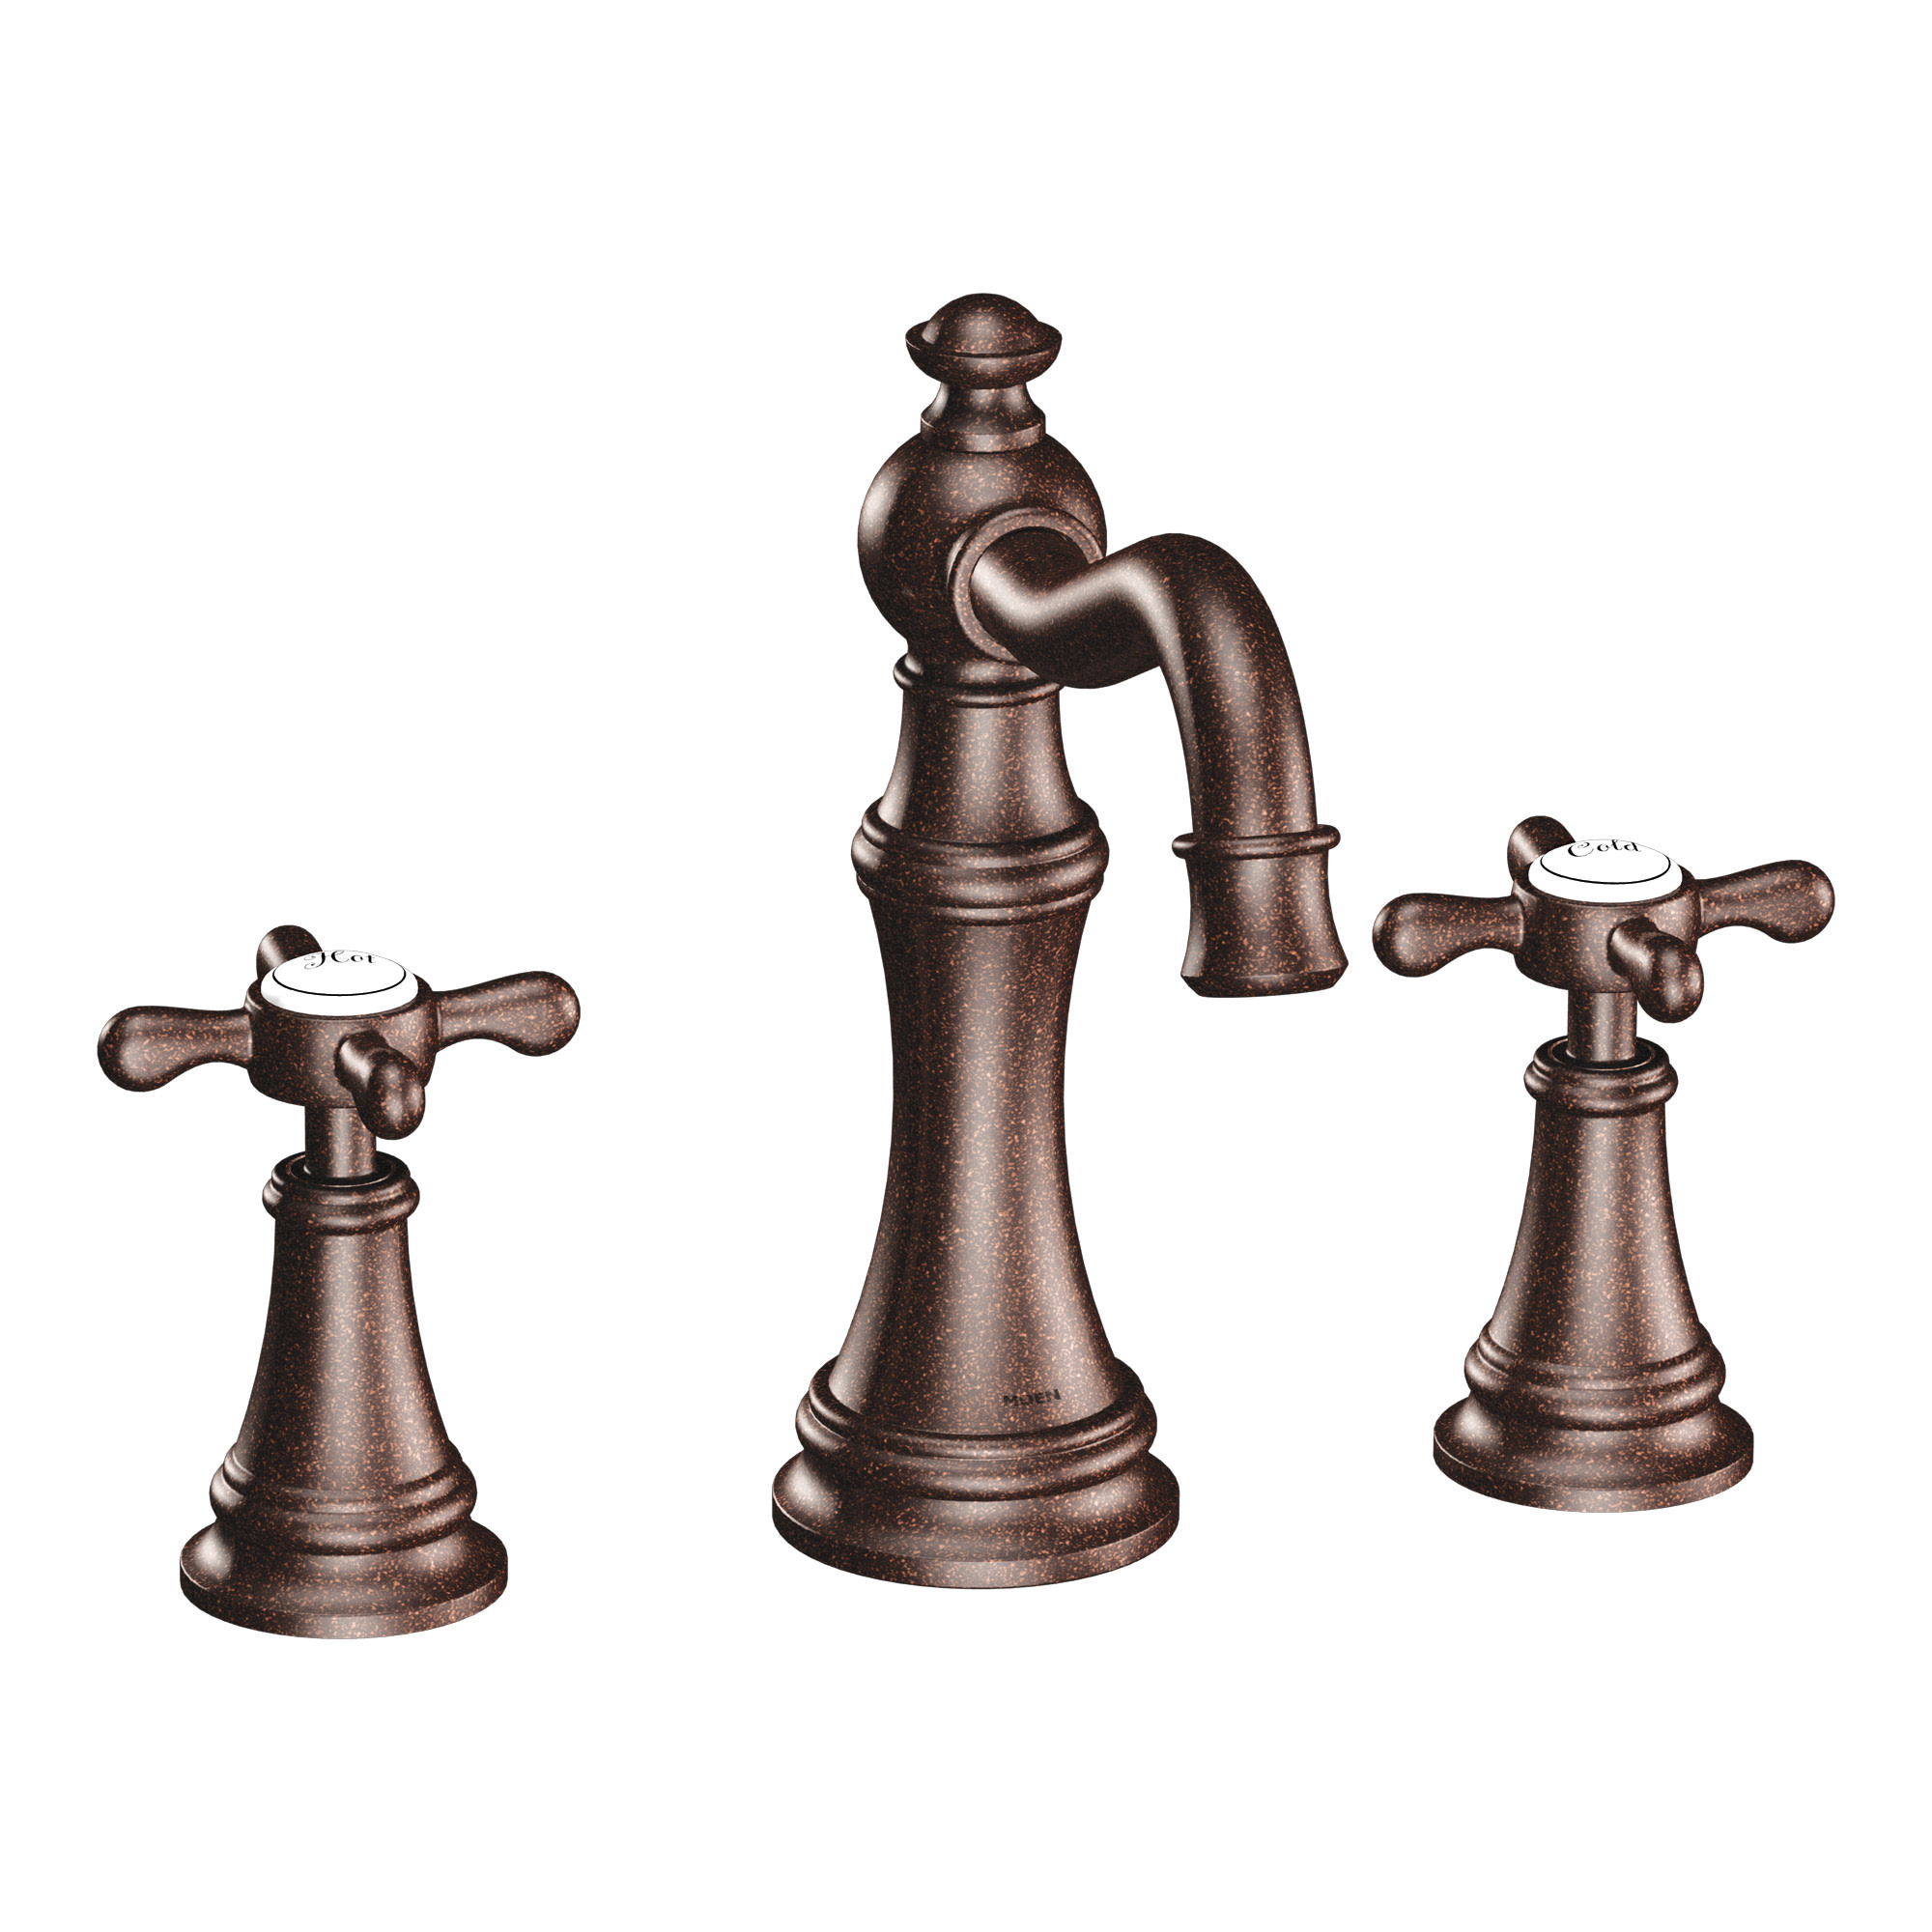 How to clean oil rubbed bronze faucets?